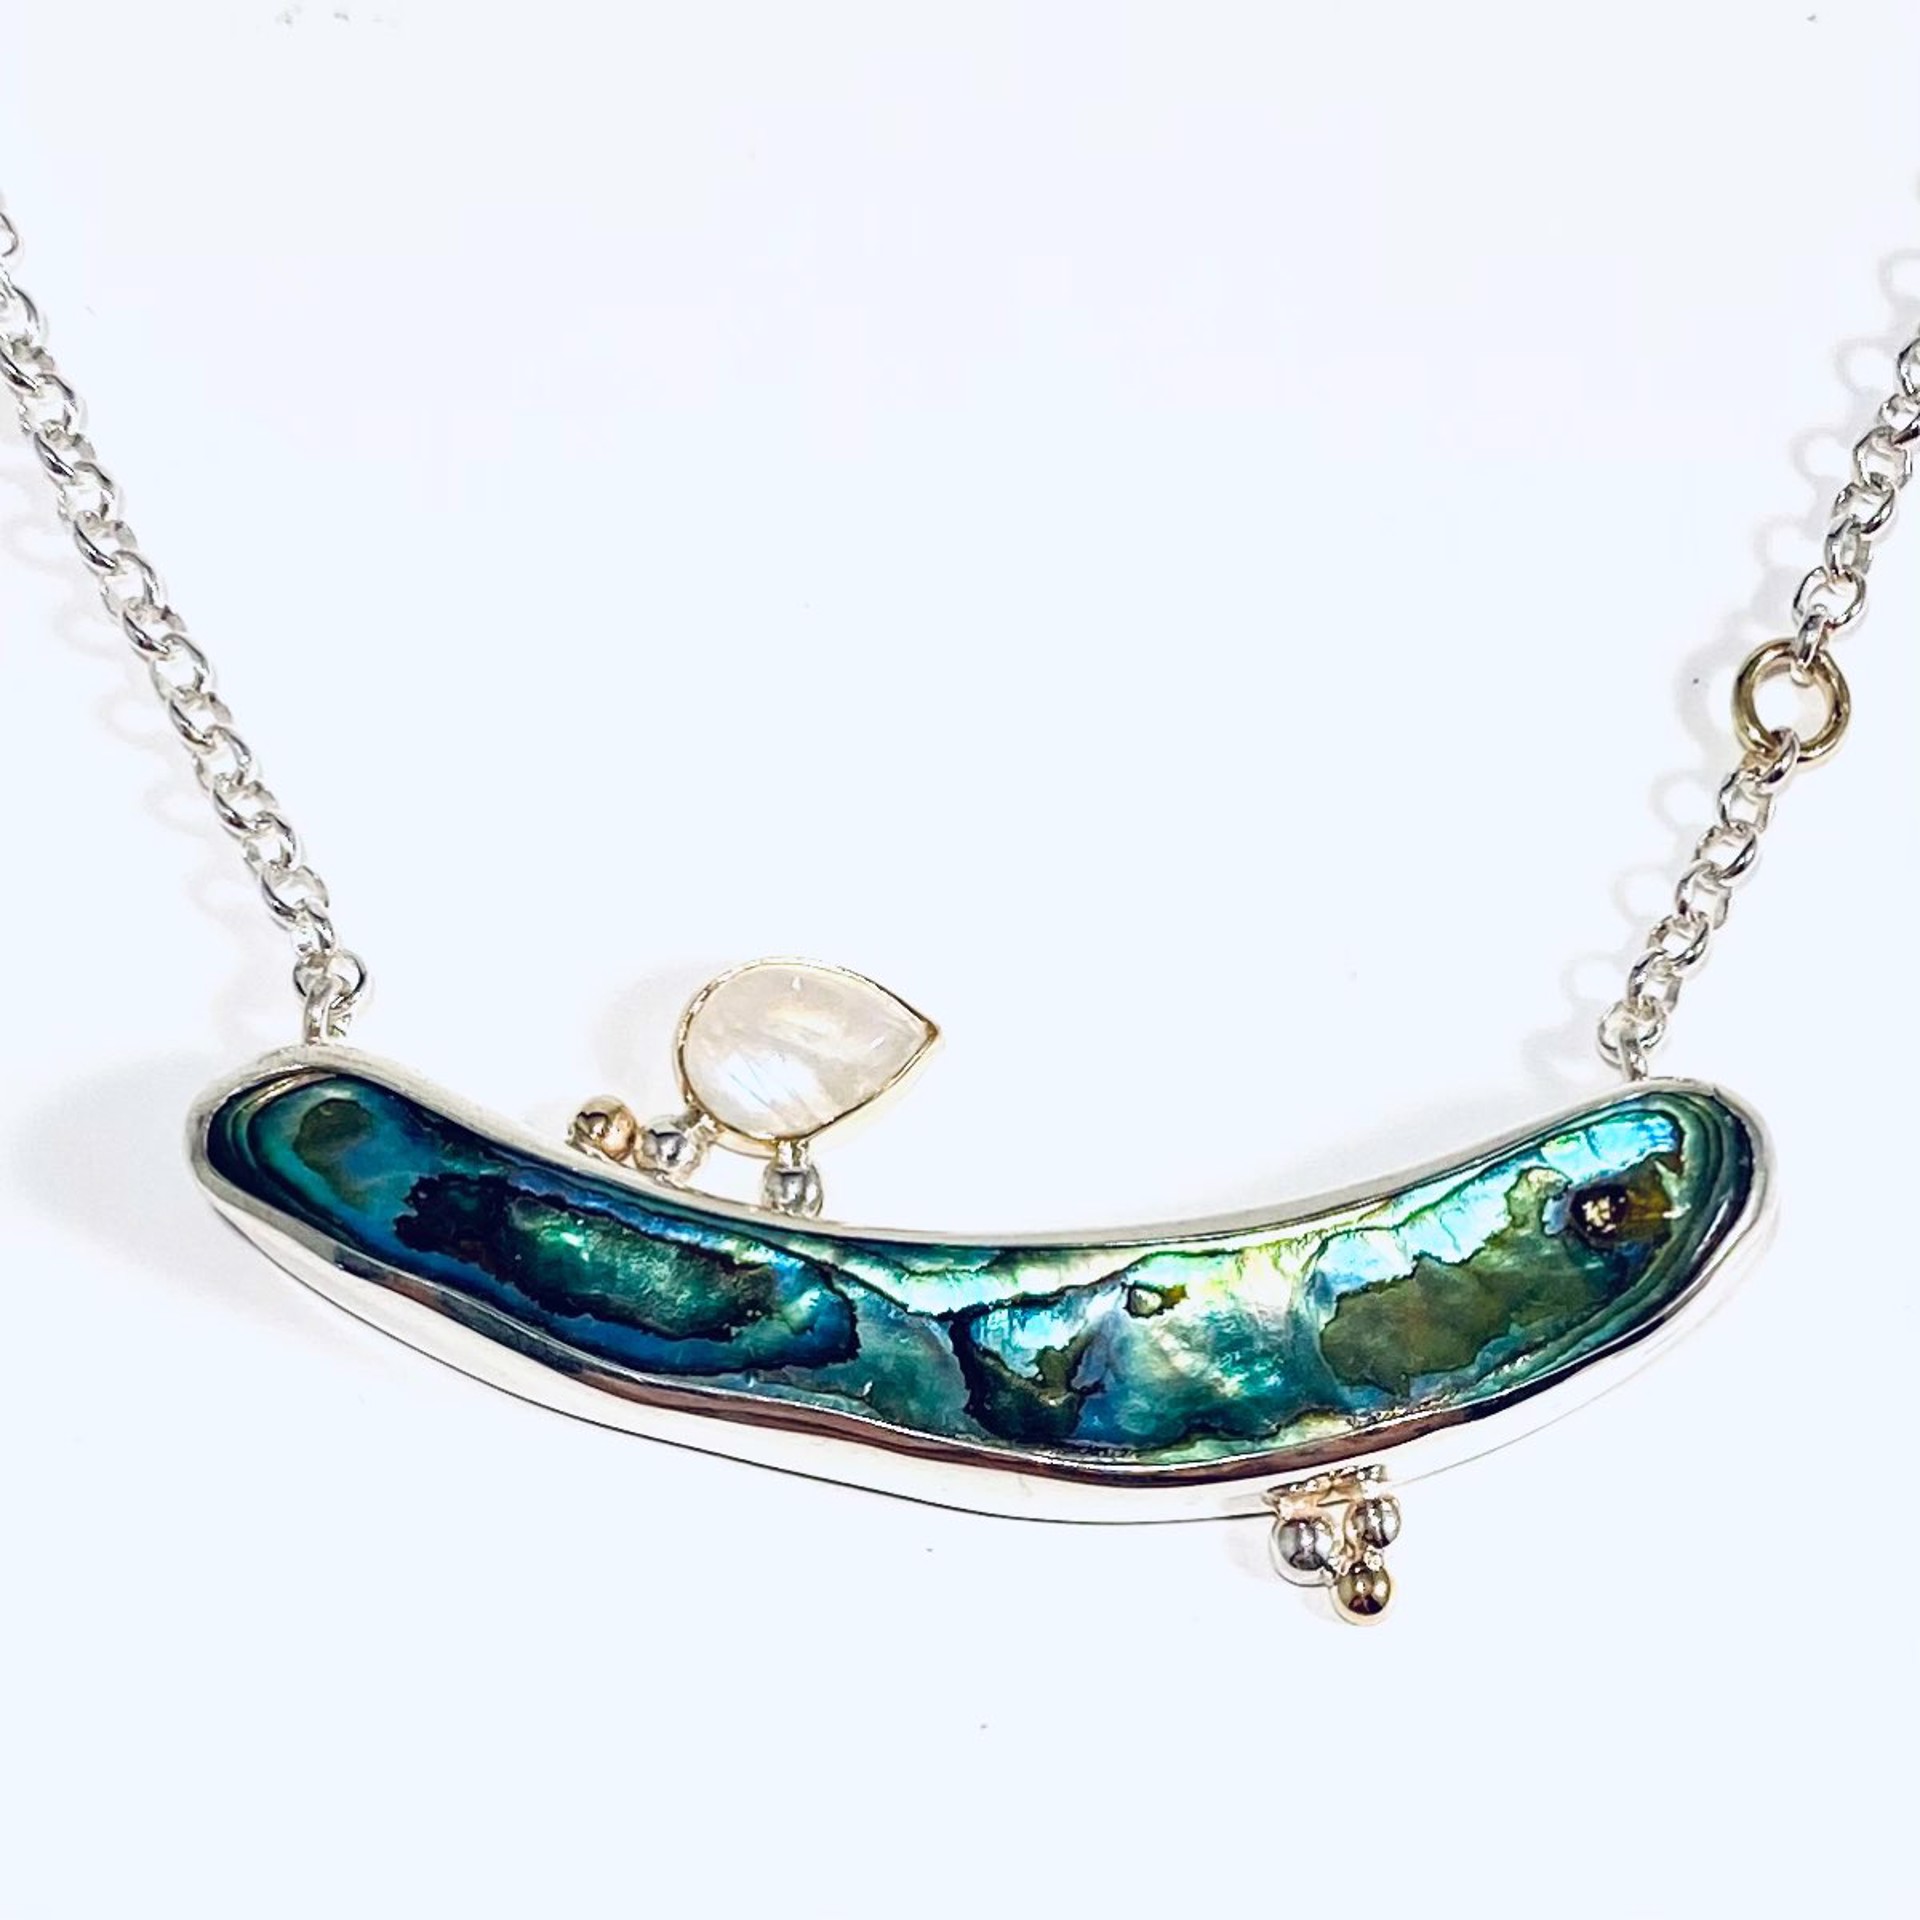 BU22-25  Abalone Paua Shell Moonstone  on 18" Adjustable Silver Chain Necklace by Barbara Umbel